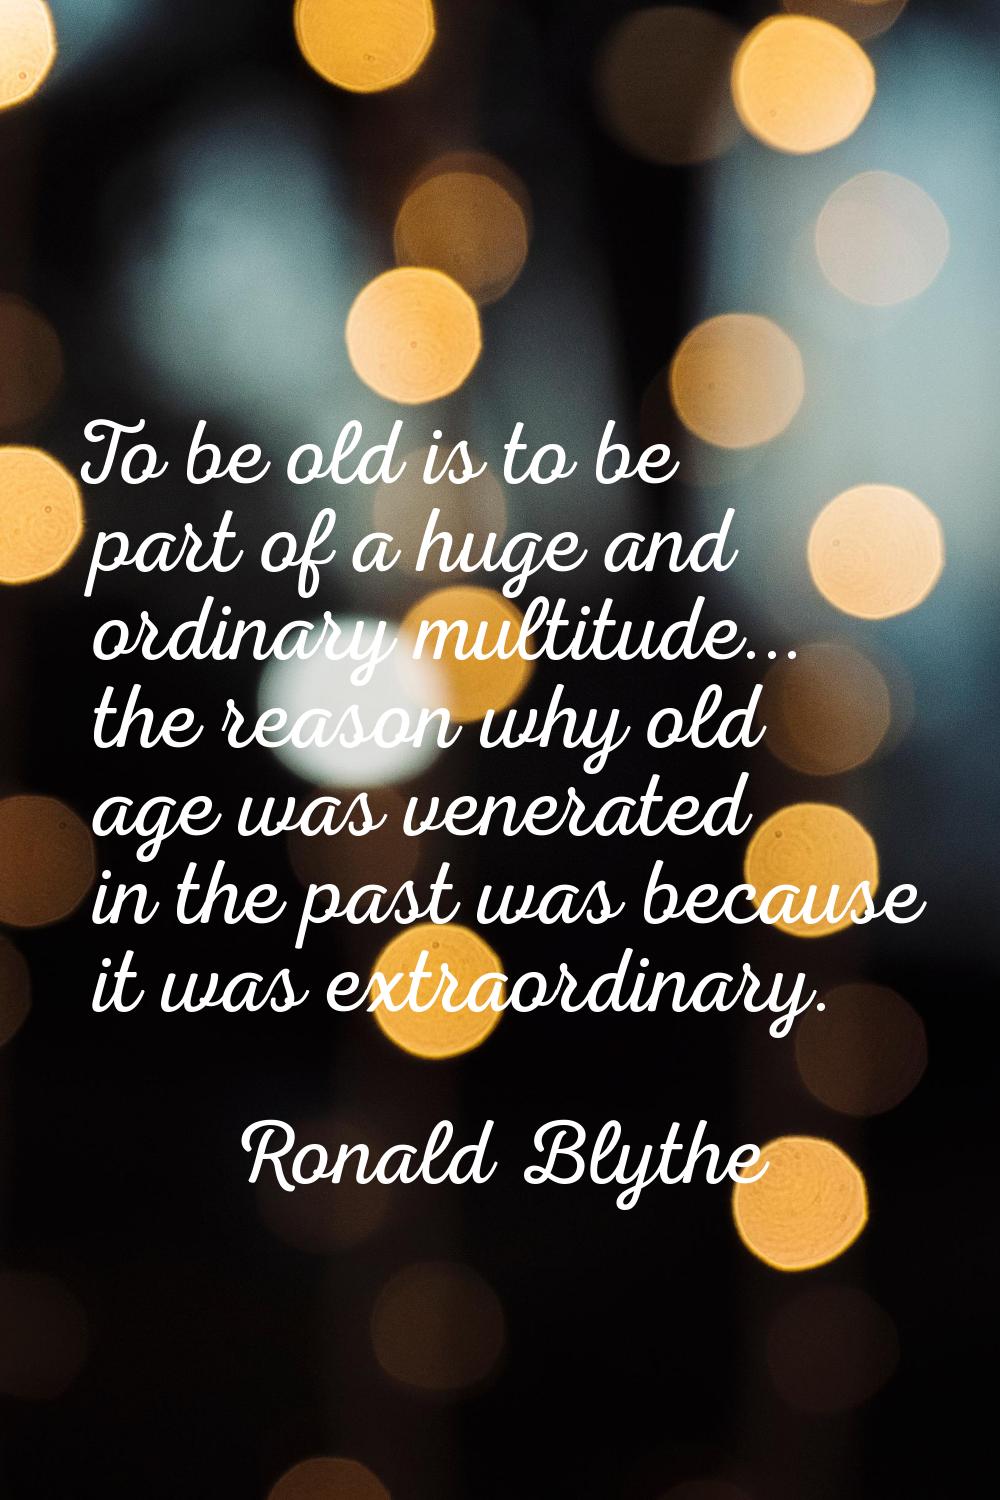 To be old is to be part of a huge and ordinary multitude... the reason why old age was venerated in